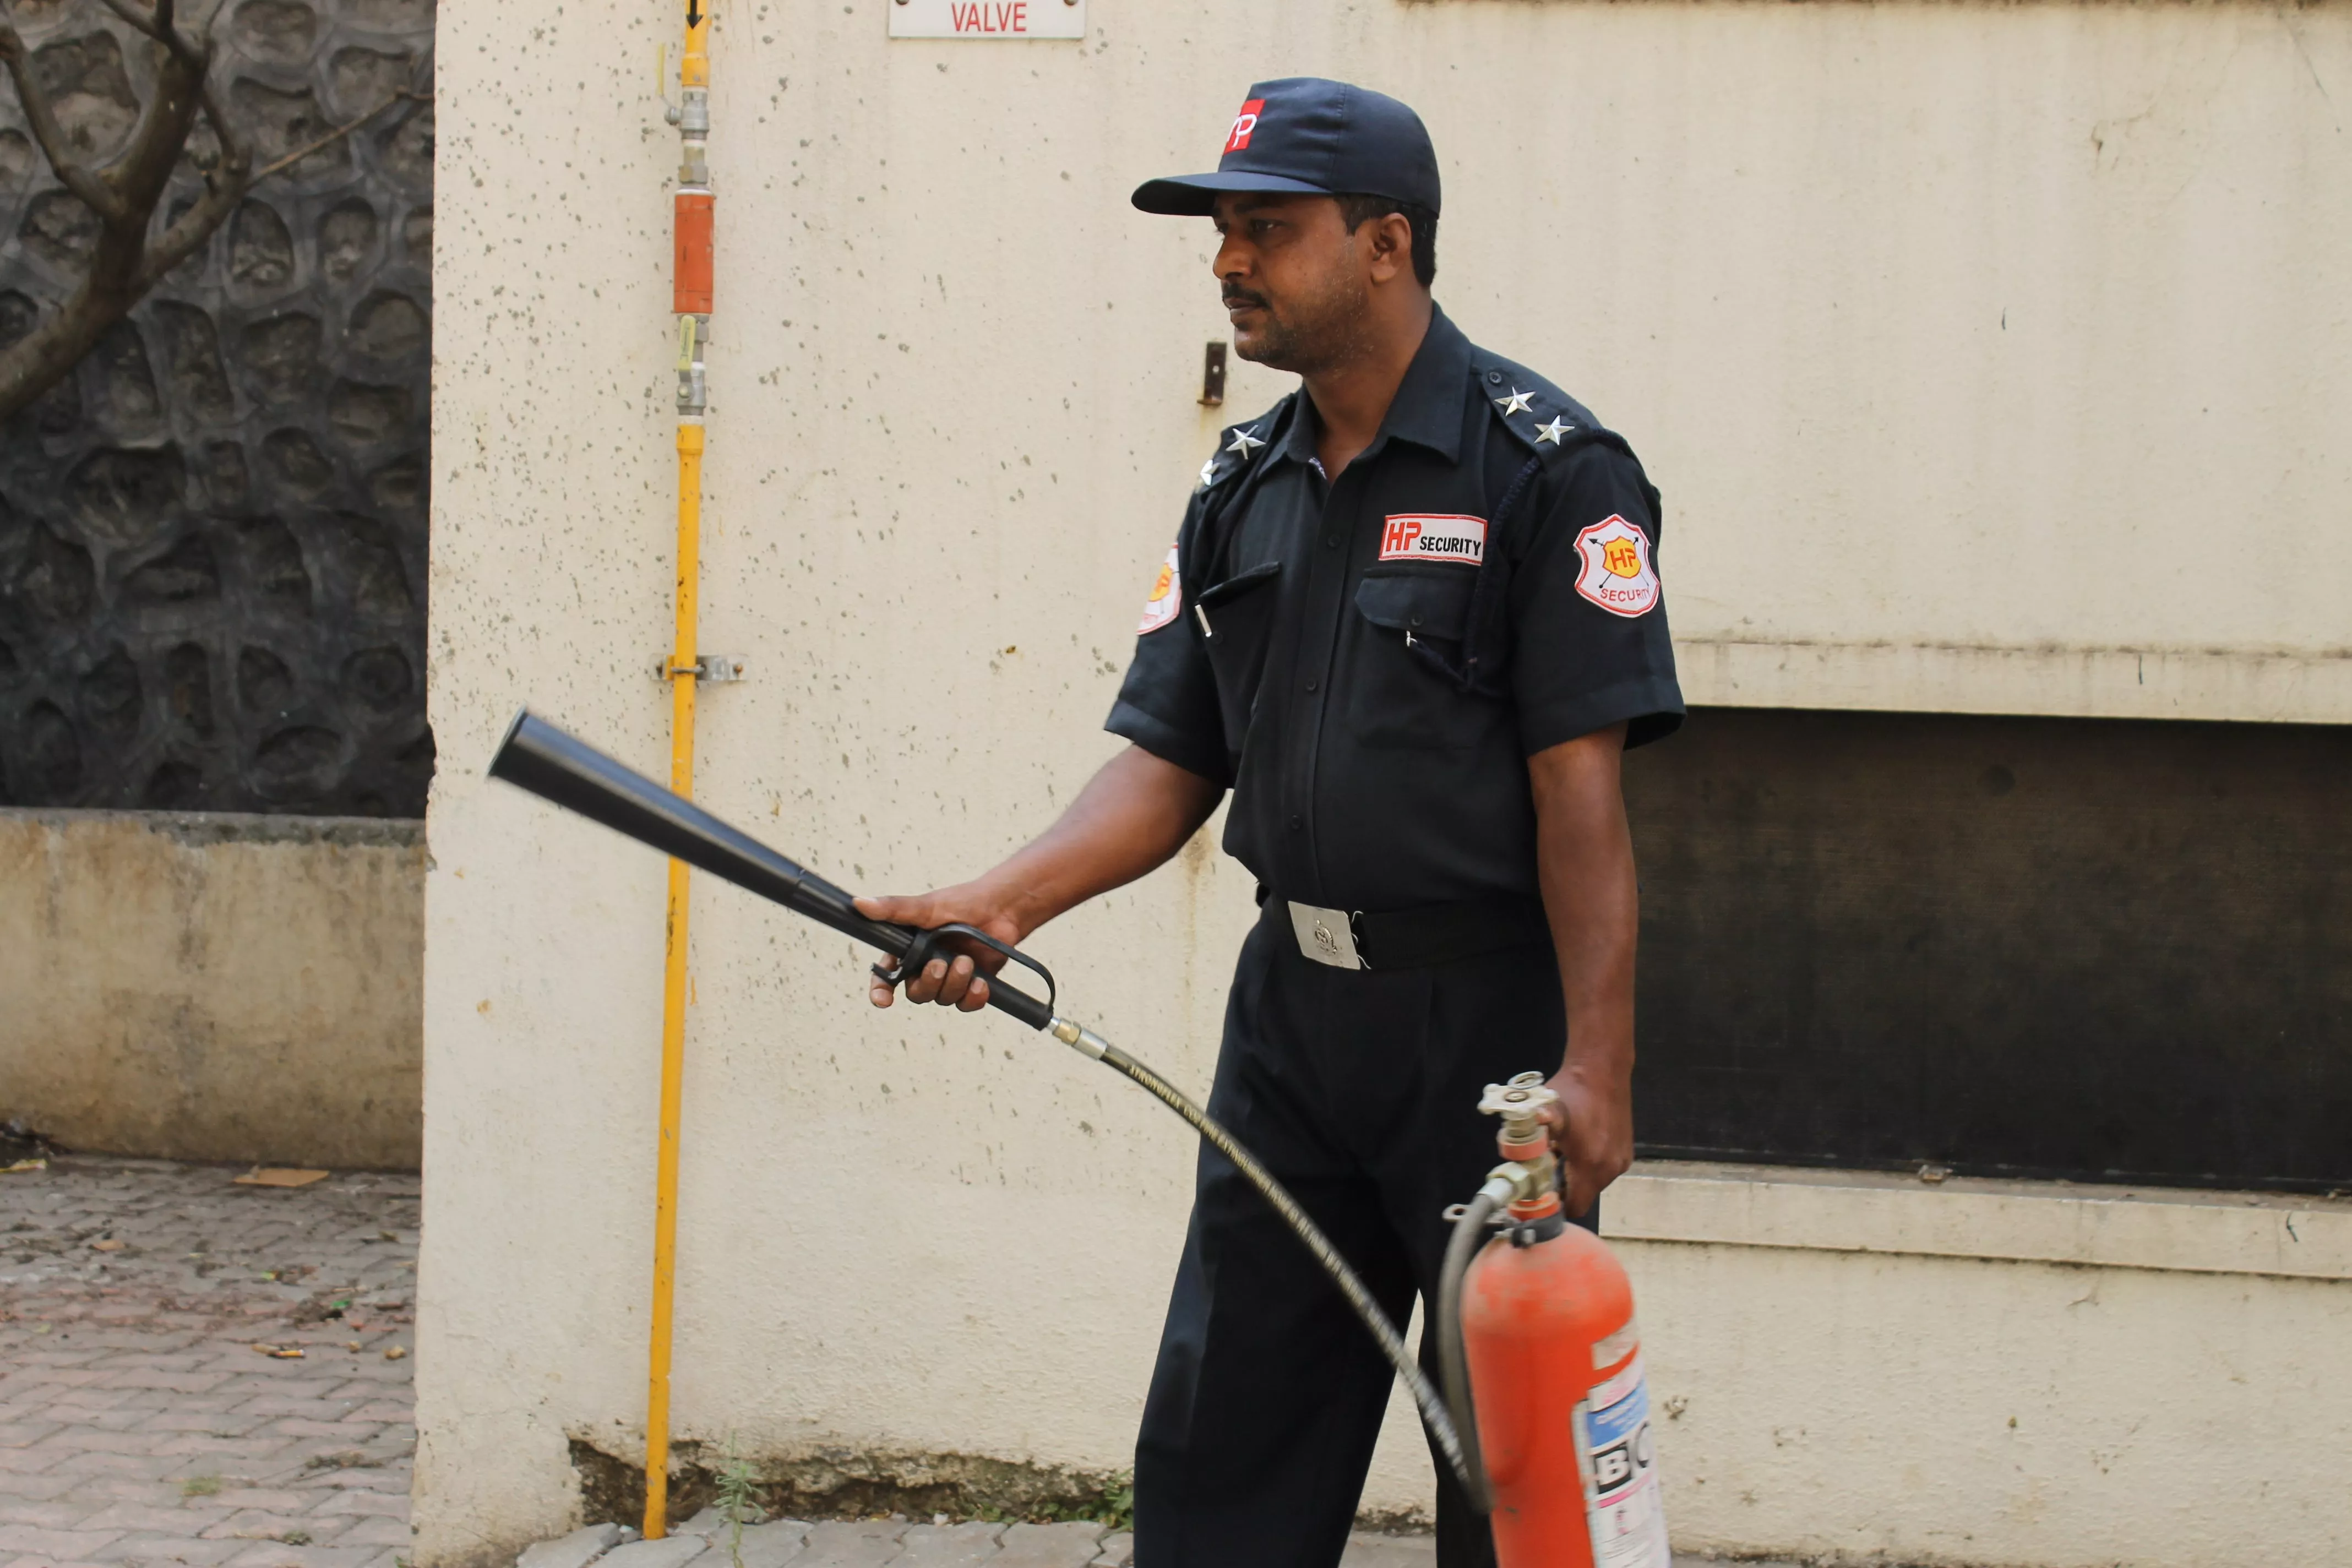 Commercial building security and housekeeping